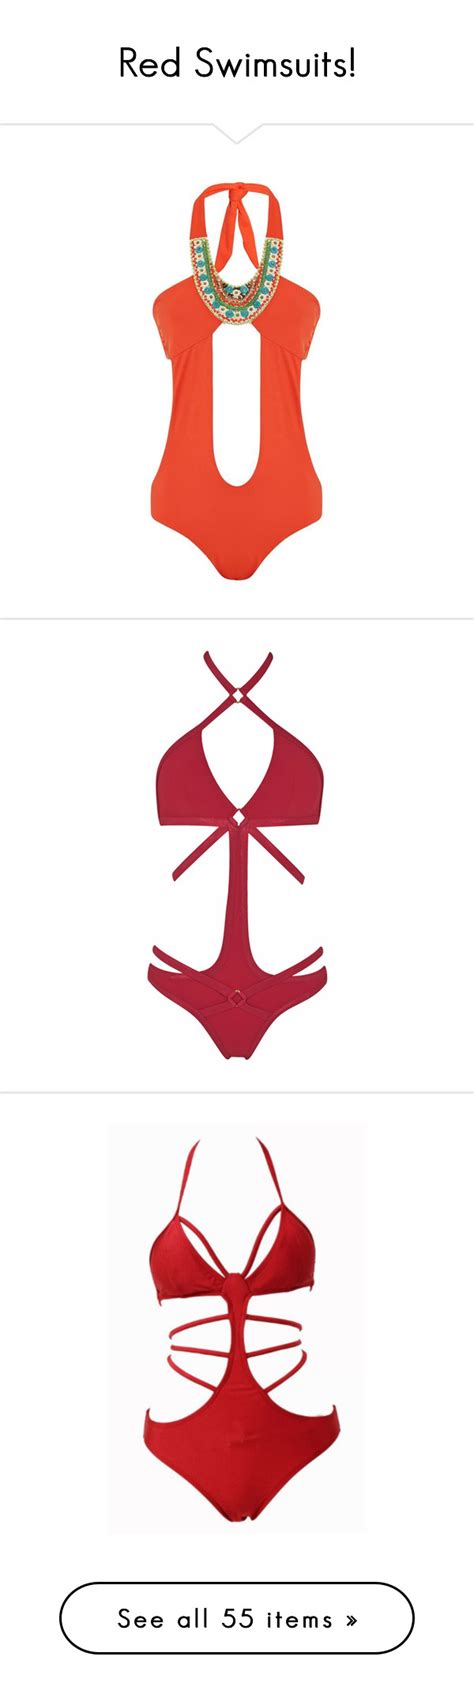 Red Swimsuits Red Swimsuit Fashion Swimsuits